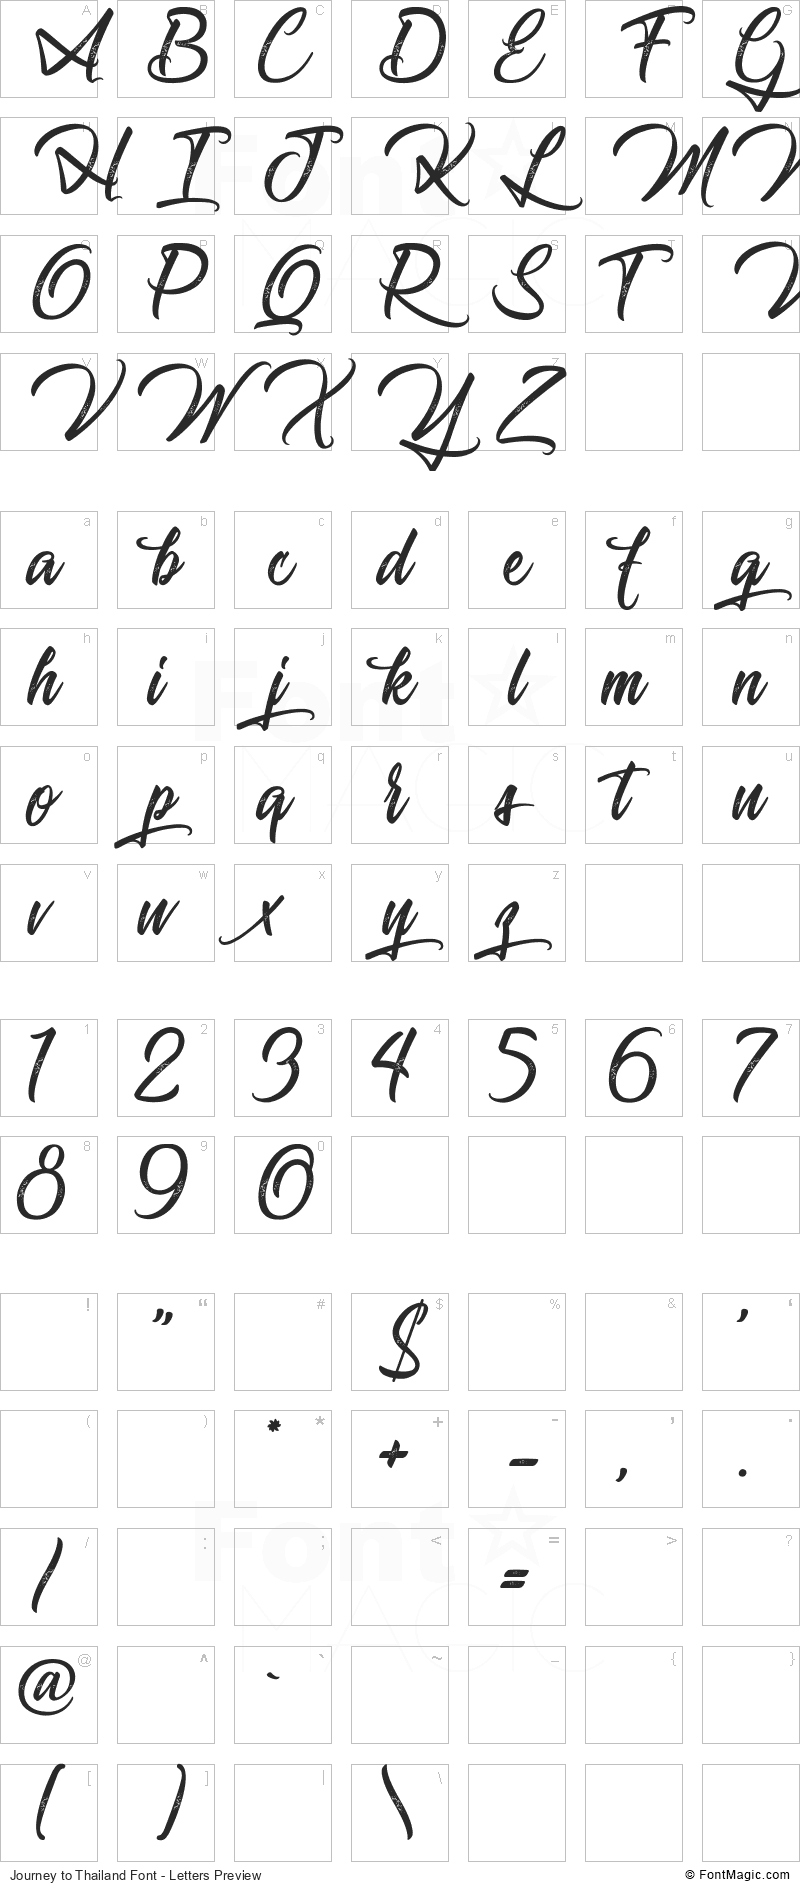 Journey to Thailand Font - All Latters Preview Chart